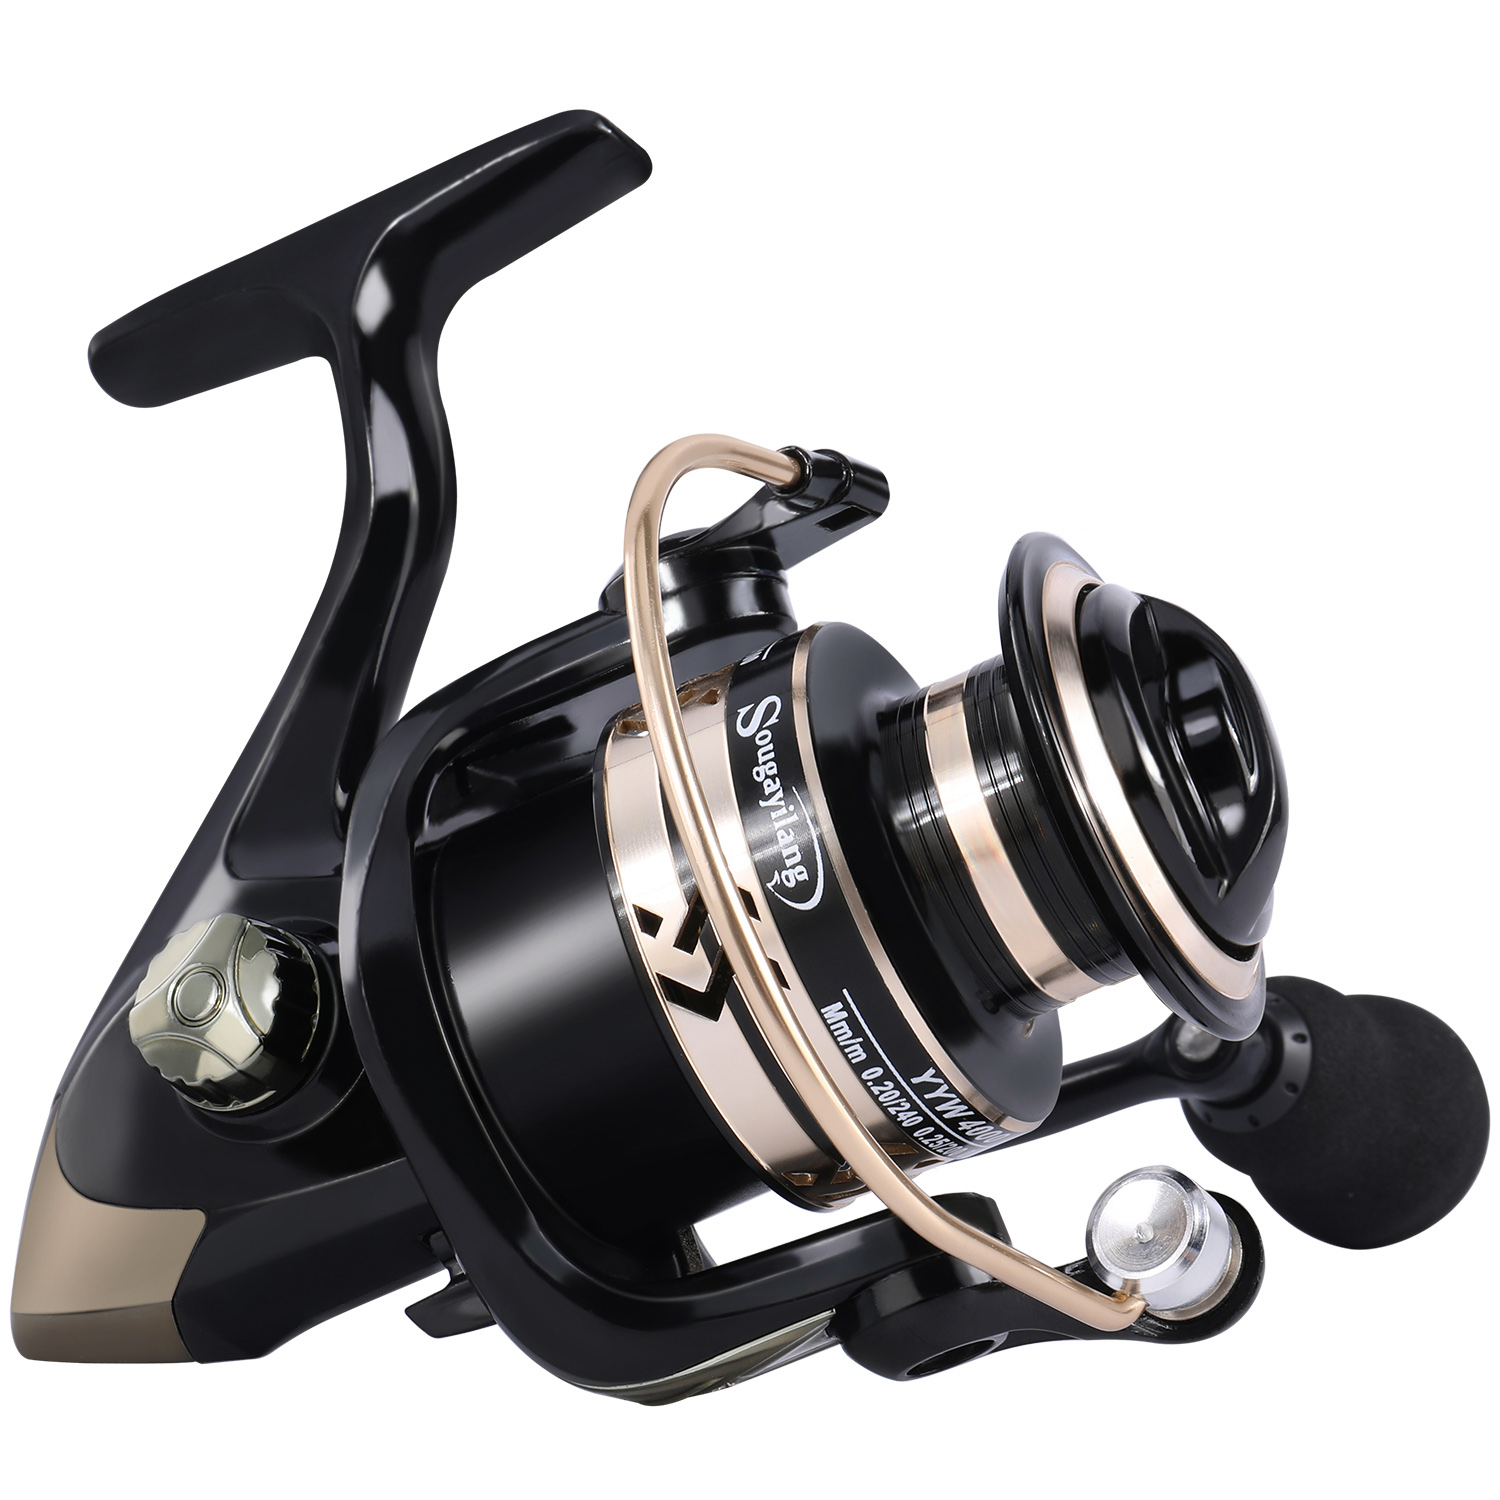 Sougayilang Fishing Reel, Ultralight Spinning Reel with Aluminum Spool,  5.2:1 High Speed Spinning Fishing Reel, 1000-6000 Series for  Freshwater-Green 3000 : Buy Online at Best Price in KSA - Souq is now